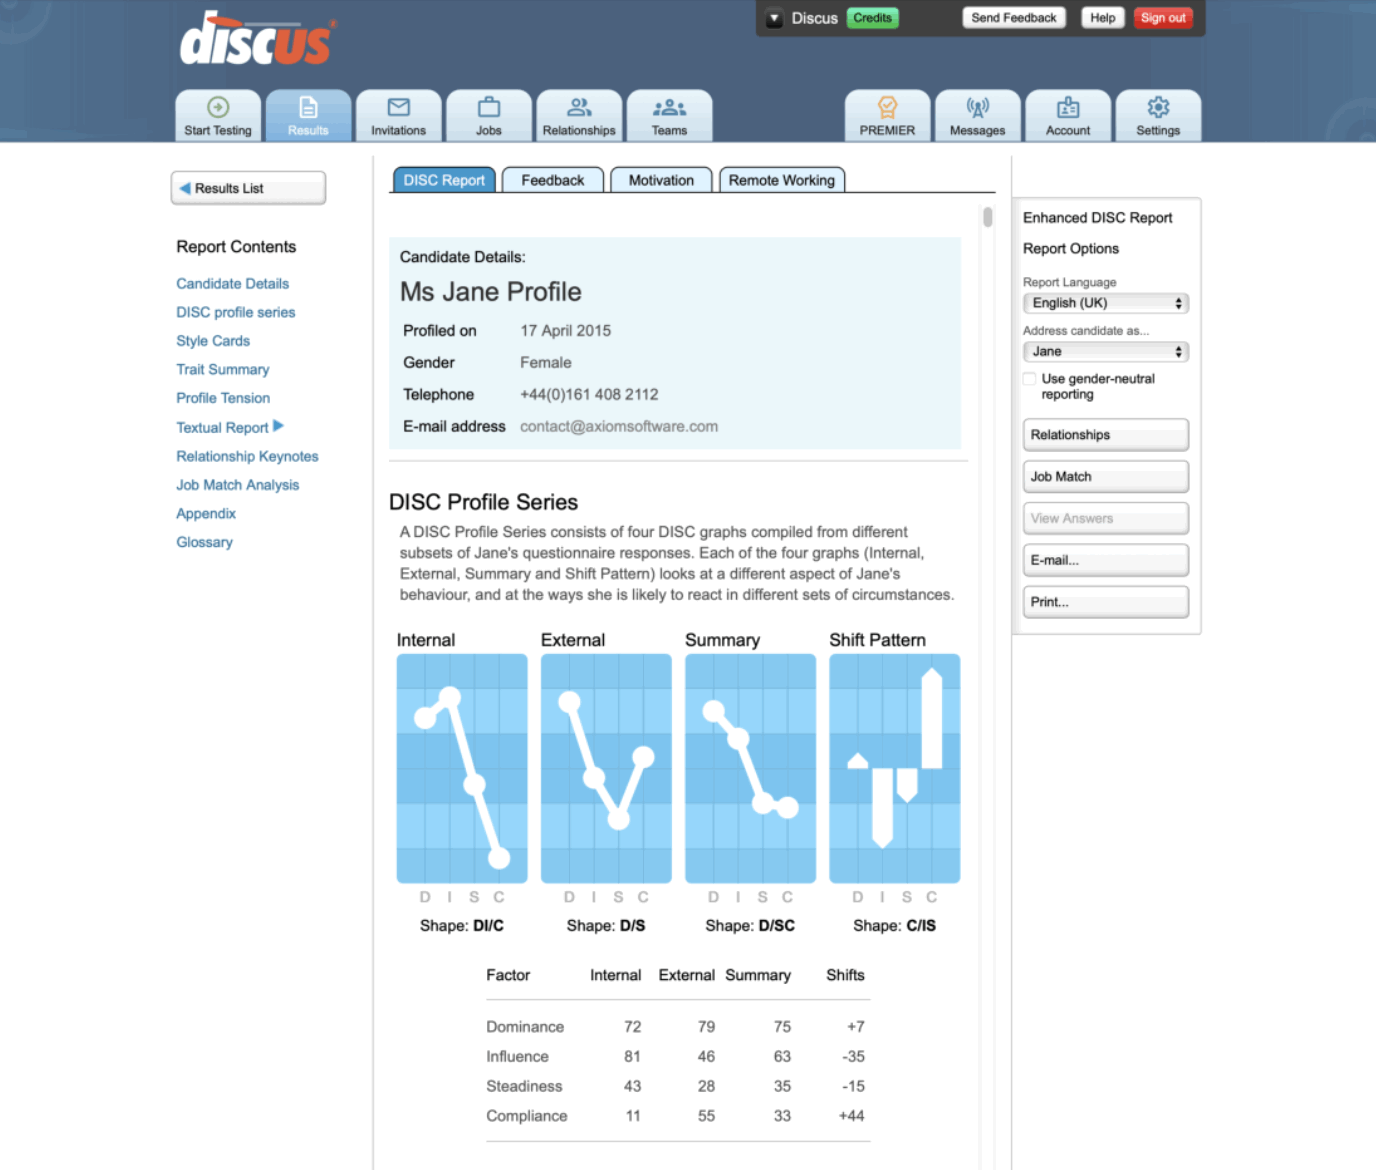 Screenshot showing a Discus report being viewed inside a browser window.